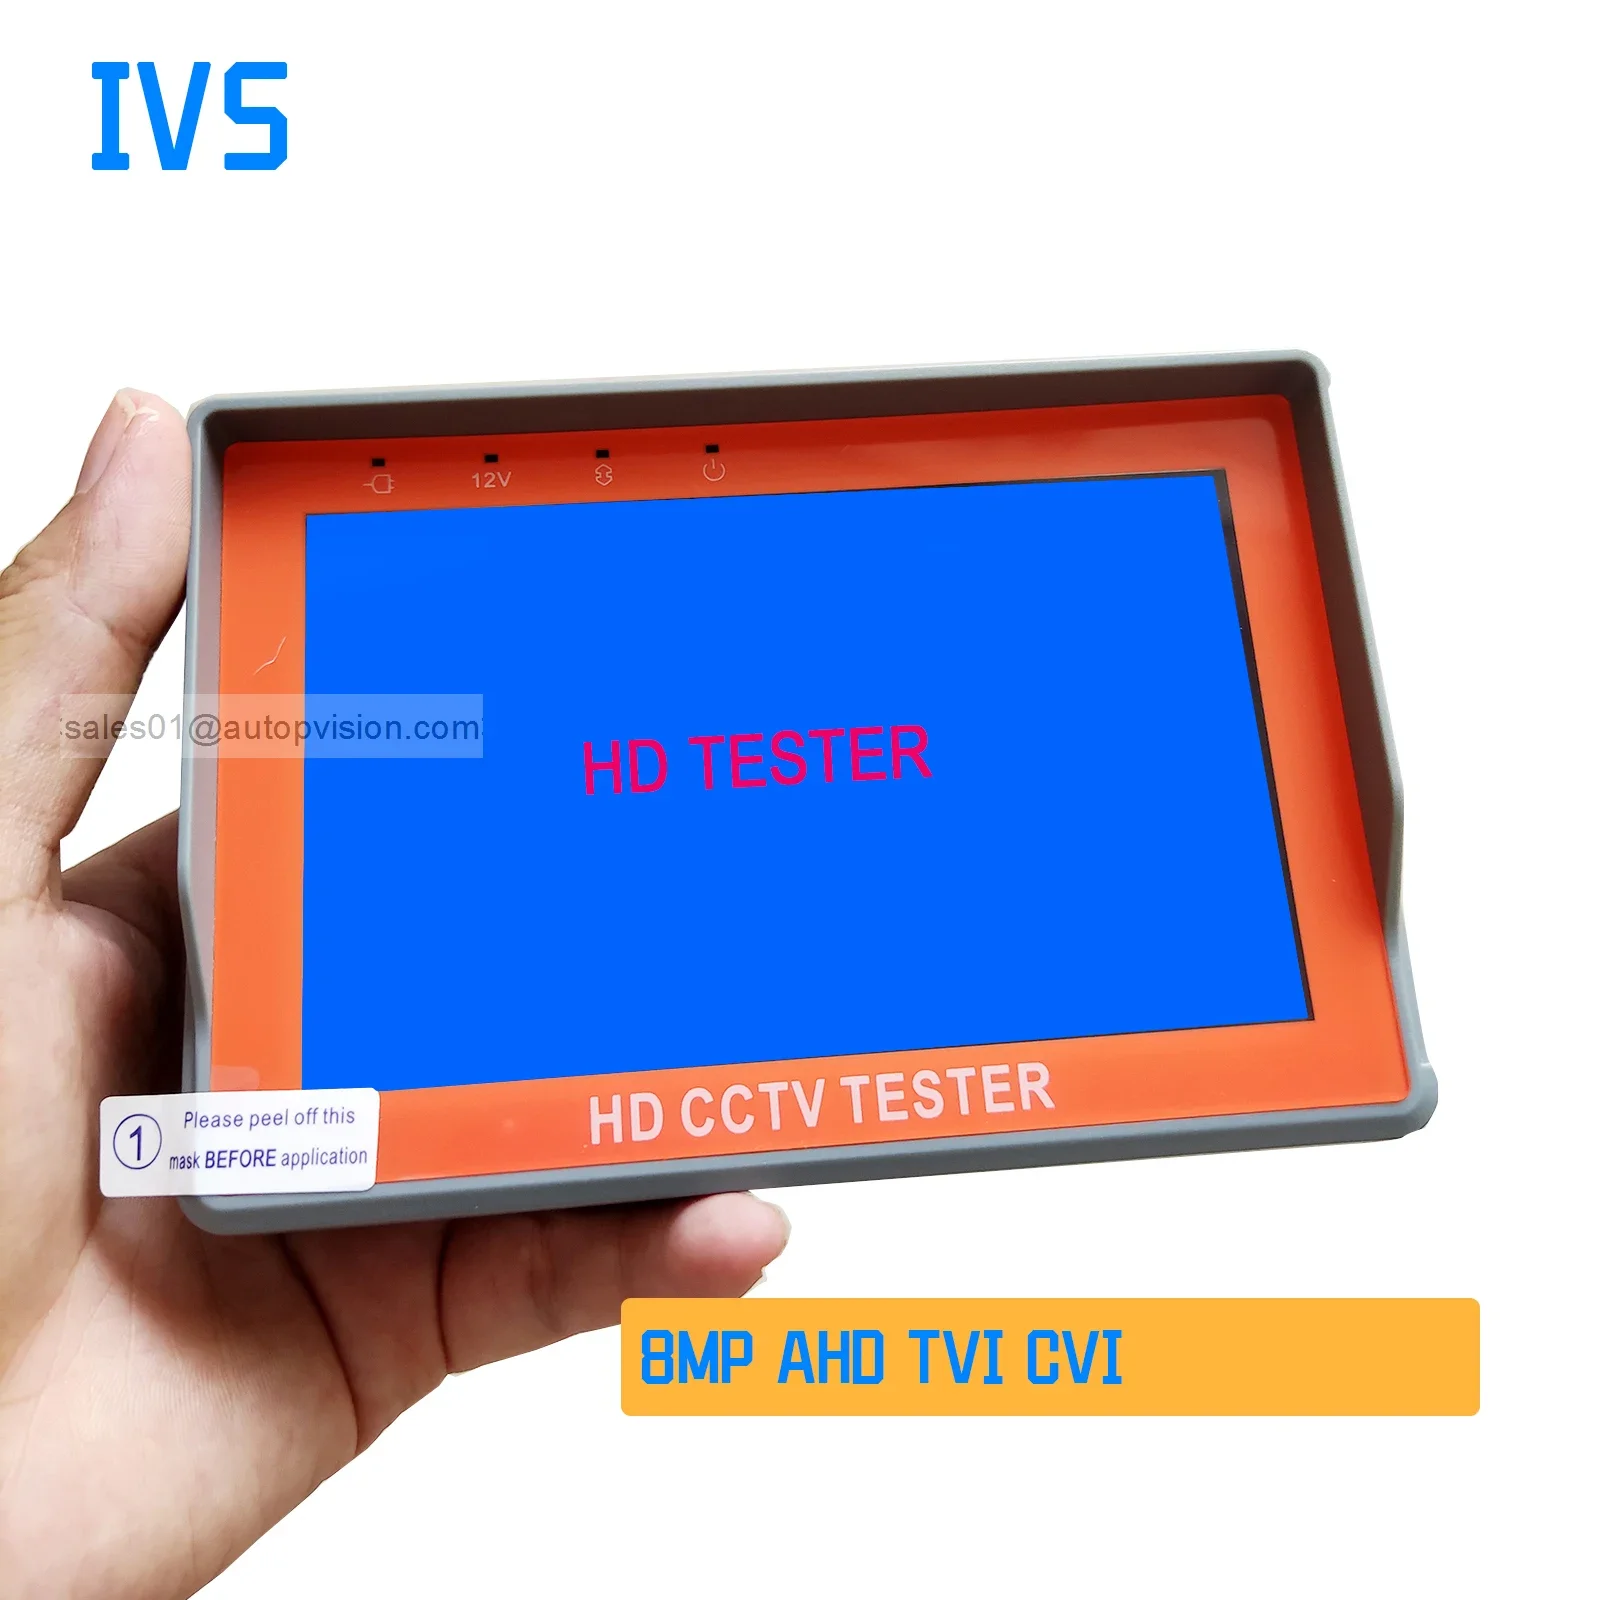 IV5  Wrist CCTV Tester 1080P 8MP Portable Camera Tester AHD TVI CVI CVBS Tester TFT LCD Analog Video 12V Power Output portable 1 8 inch 5 inch 7 inch outdoor mini pocket fm radio with analog tv and watch function smart pocket tv